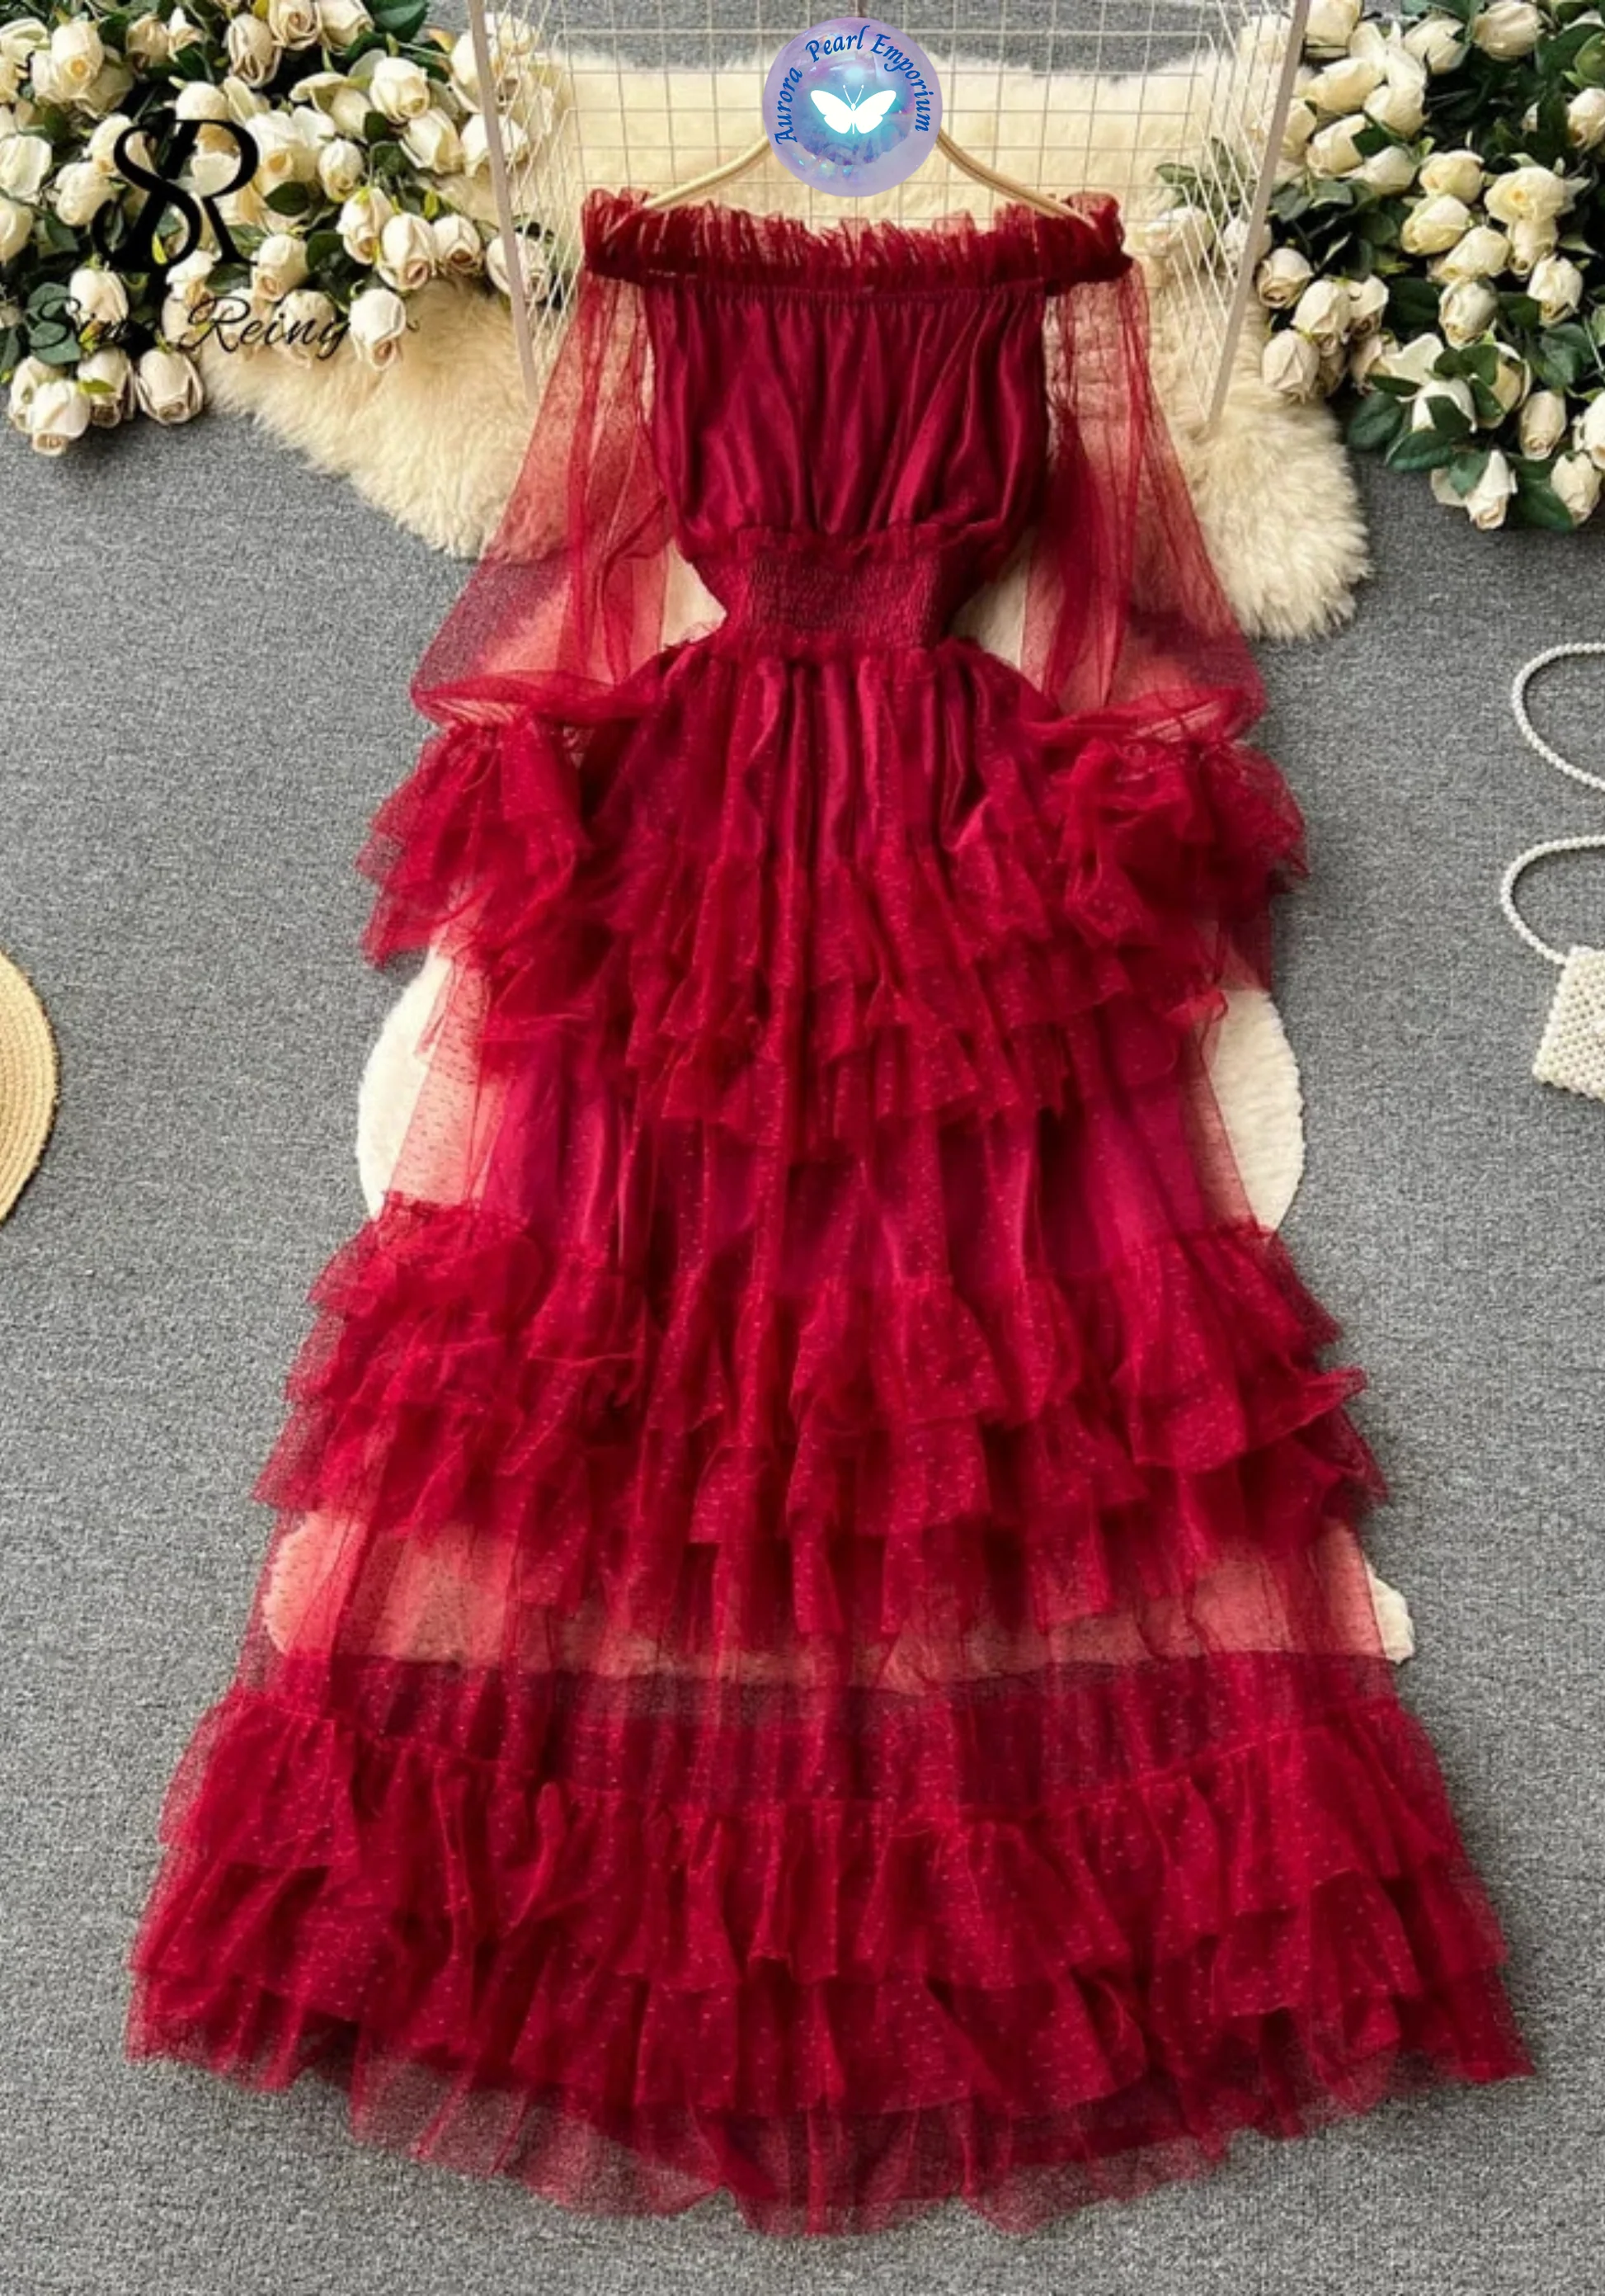 a red dress on a white fur rug